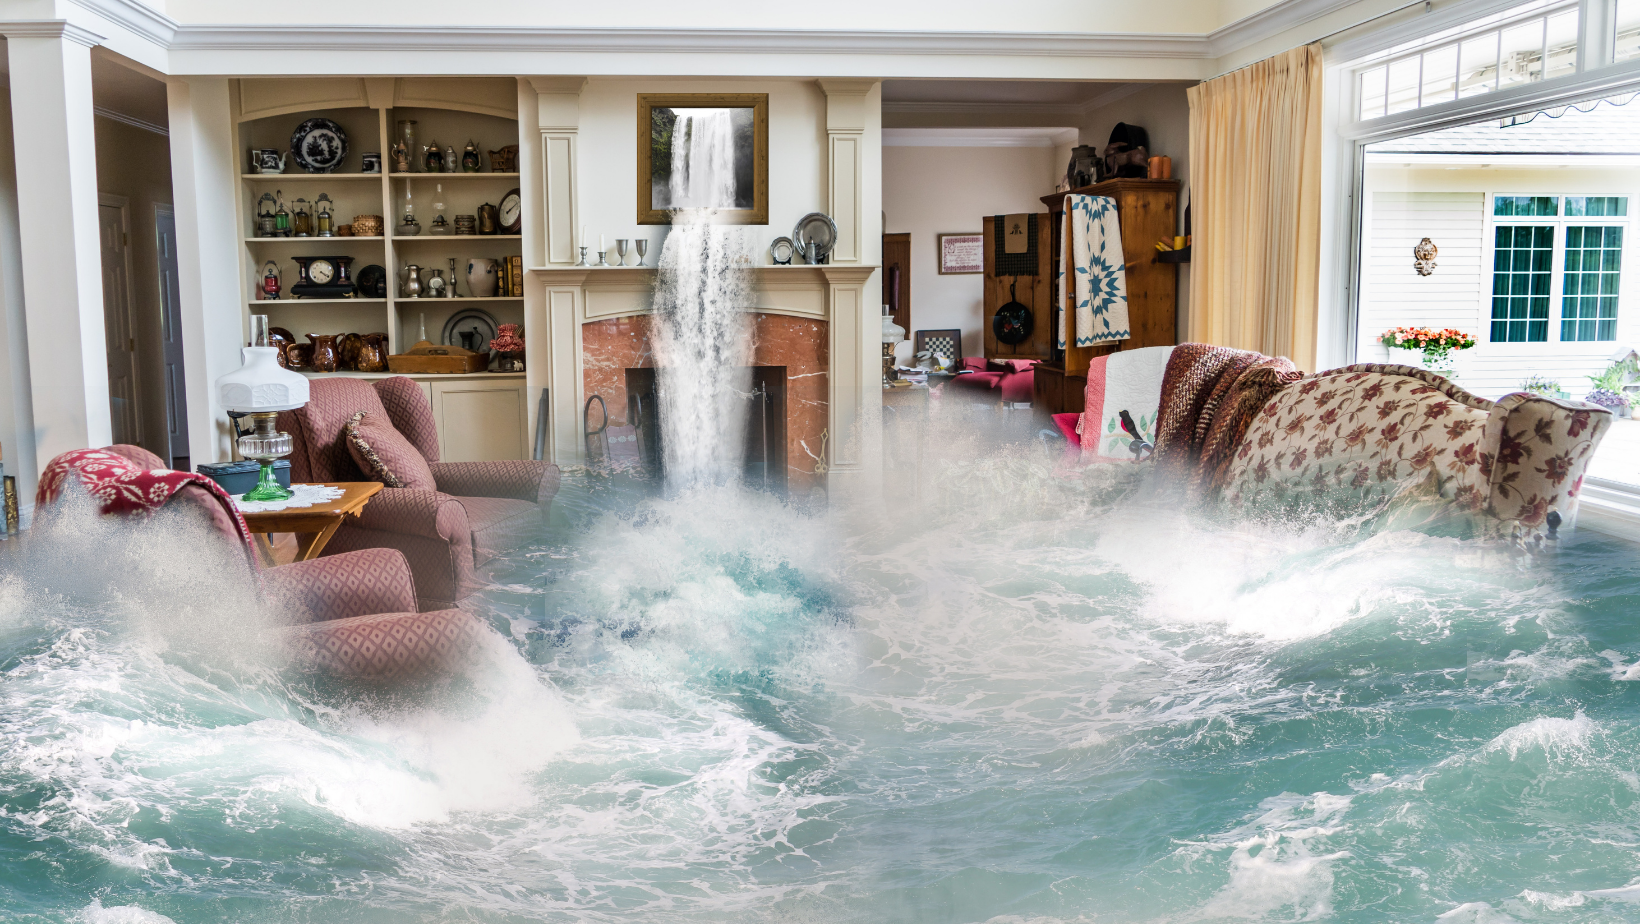 Basement Flooding? Here are 8 MUST-KNOW Steps To Take Now